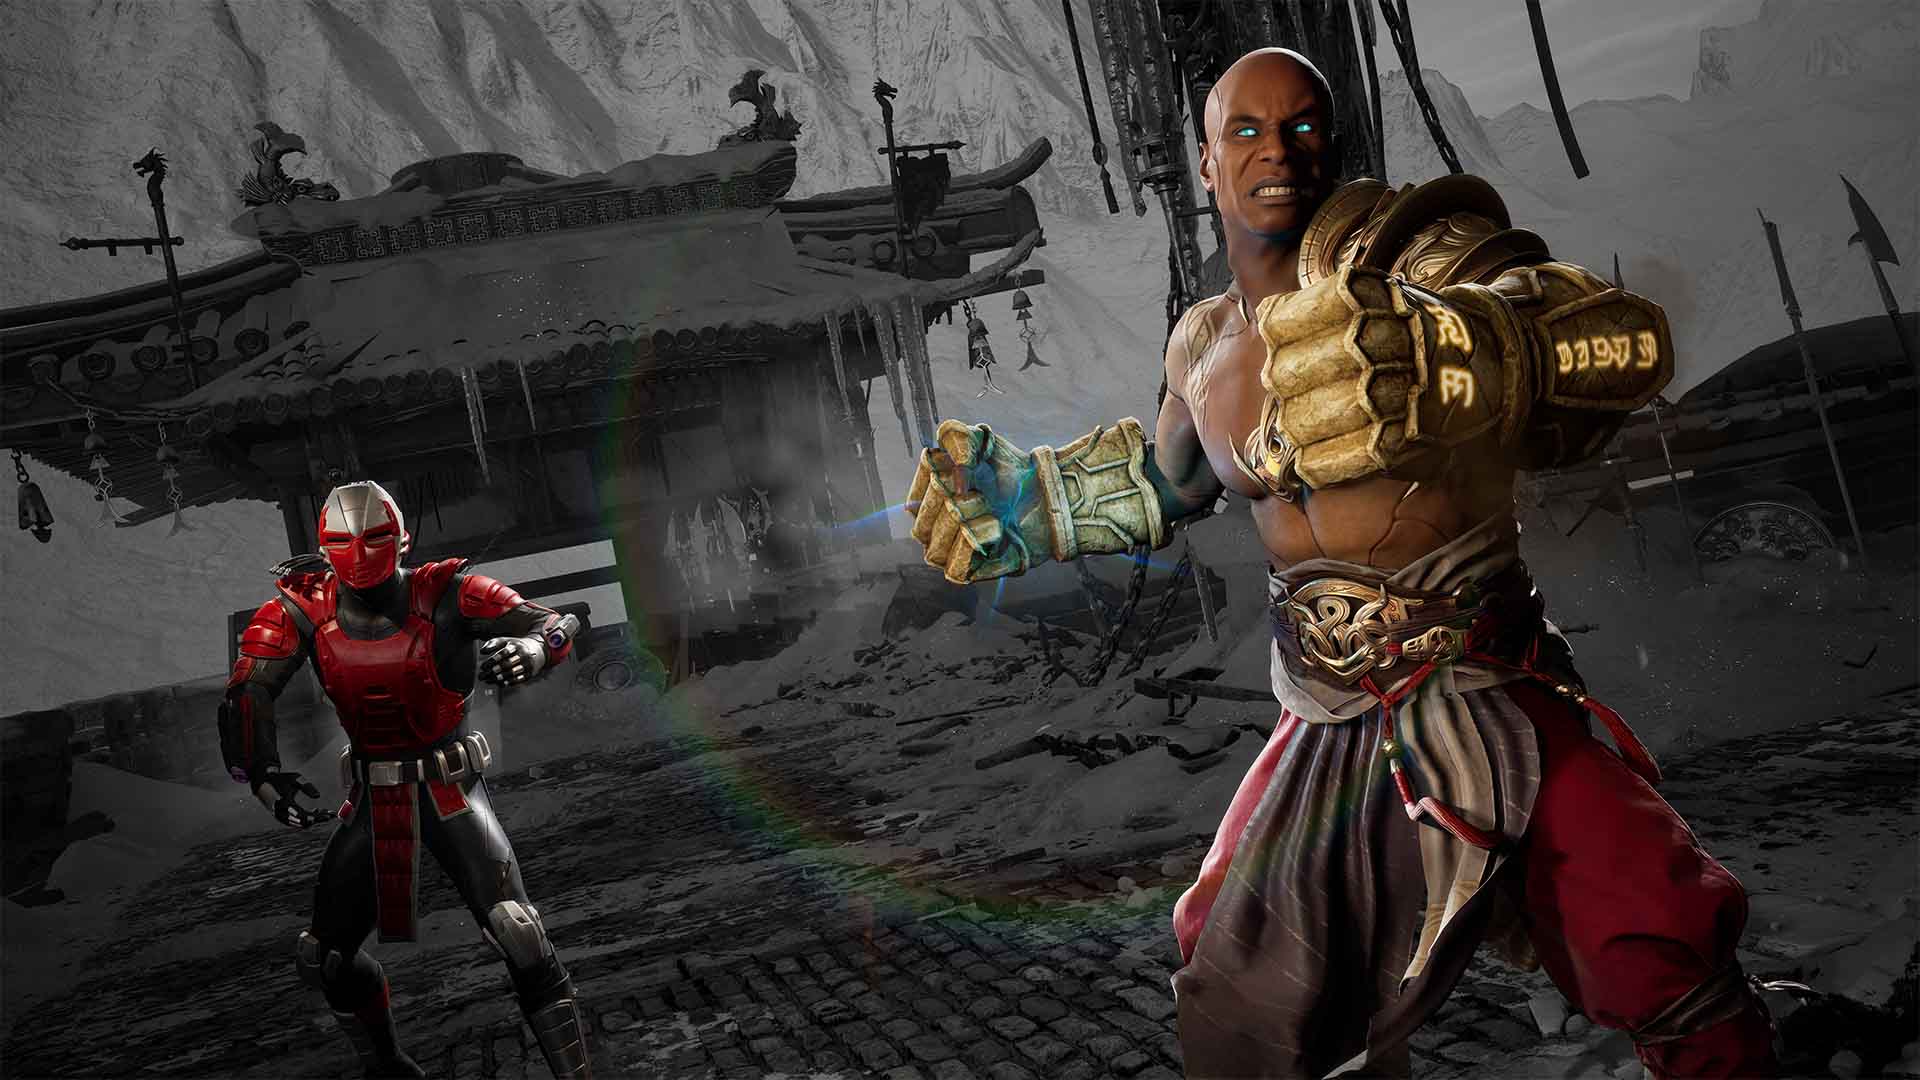 All Characters Revealed - Mortal Kombat X Official Roster 